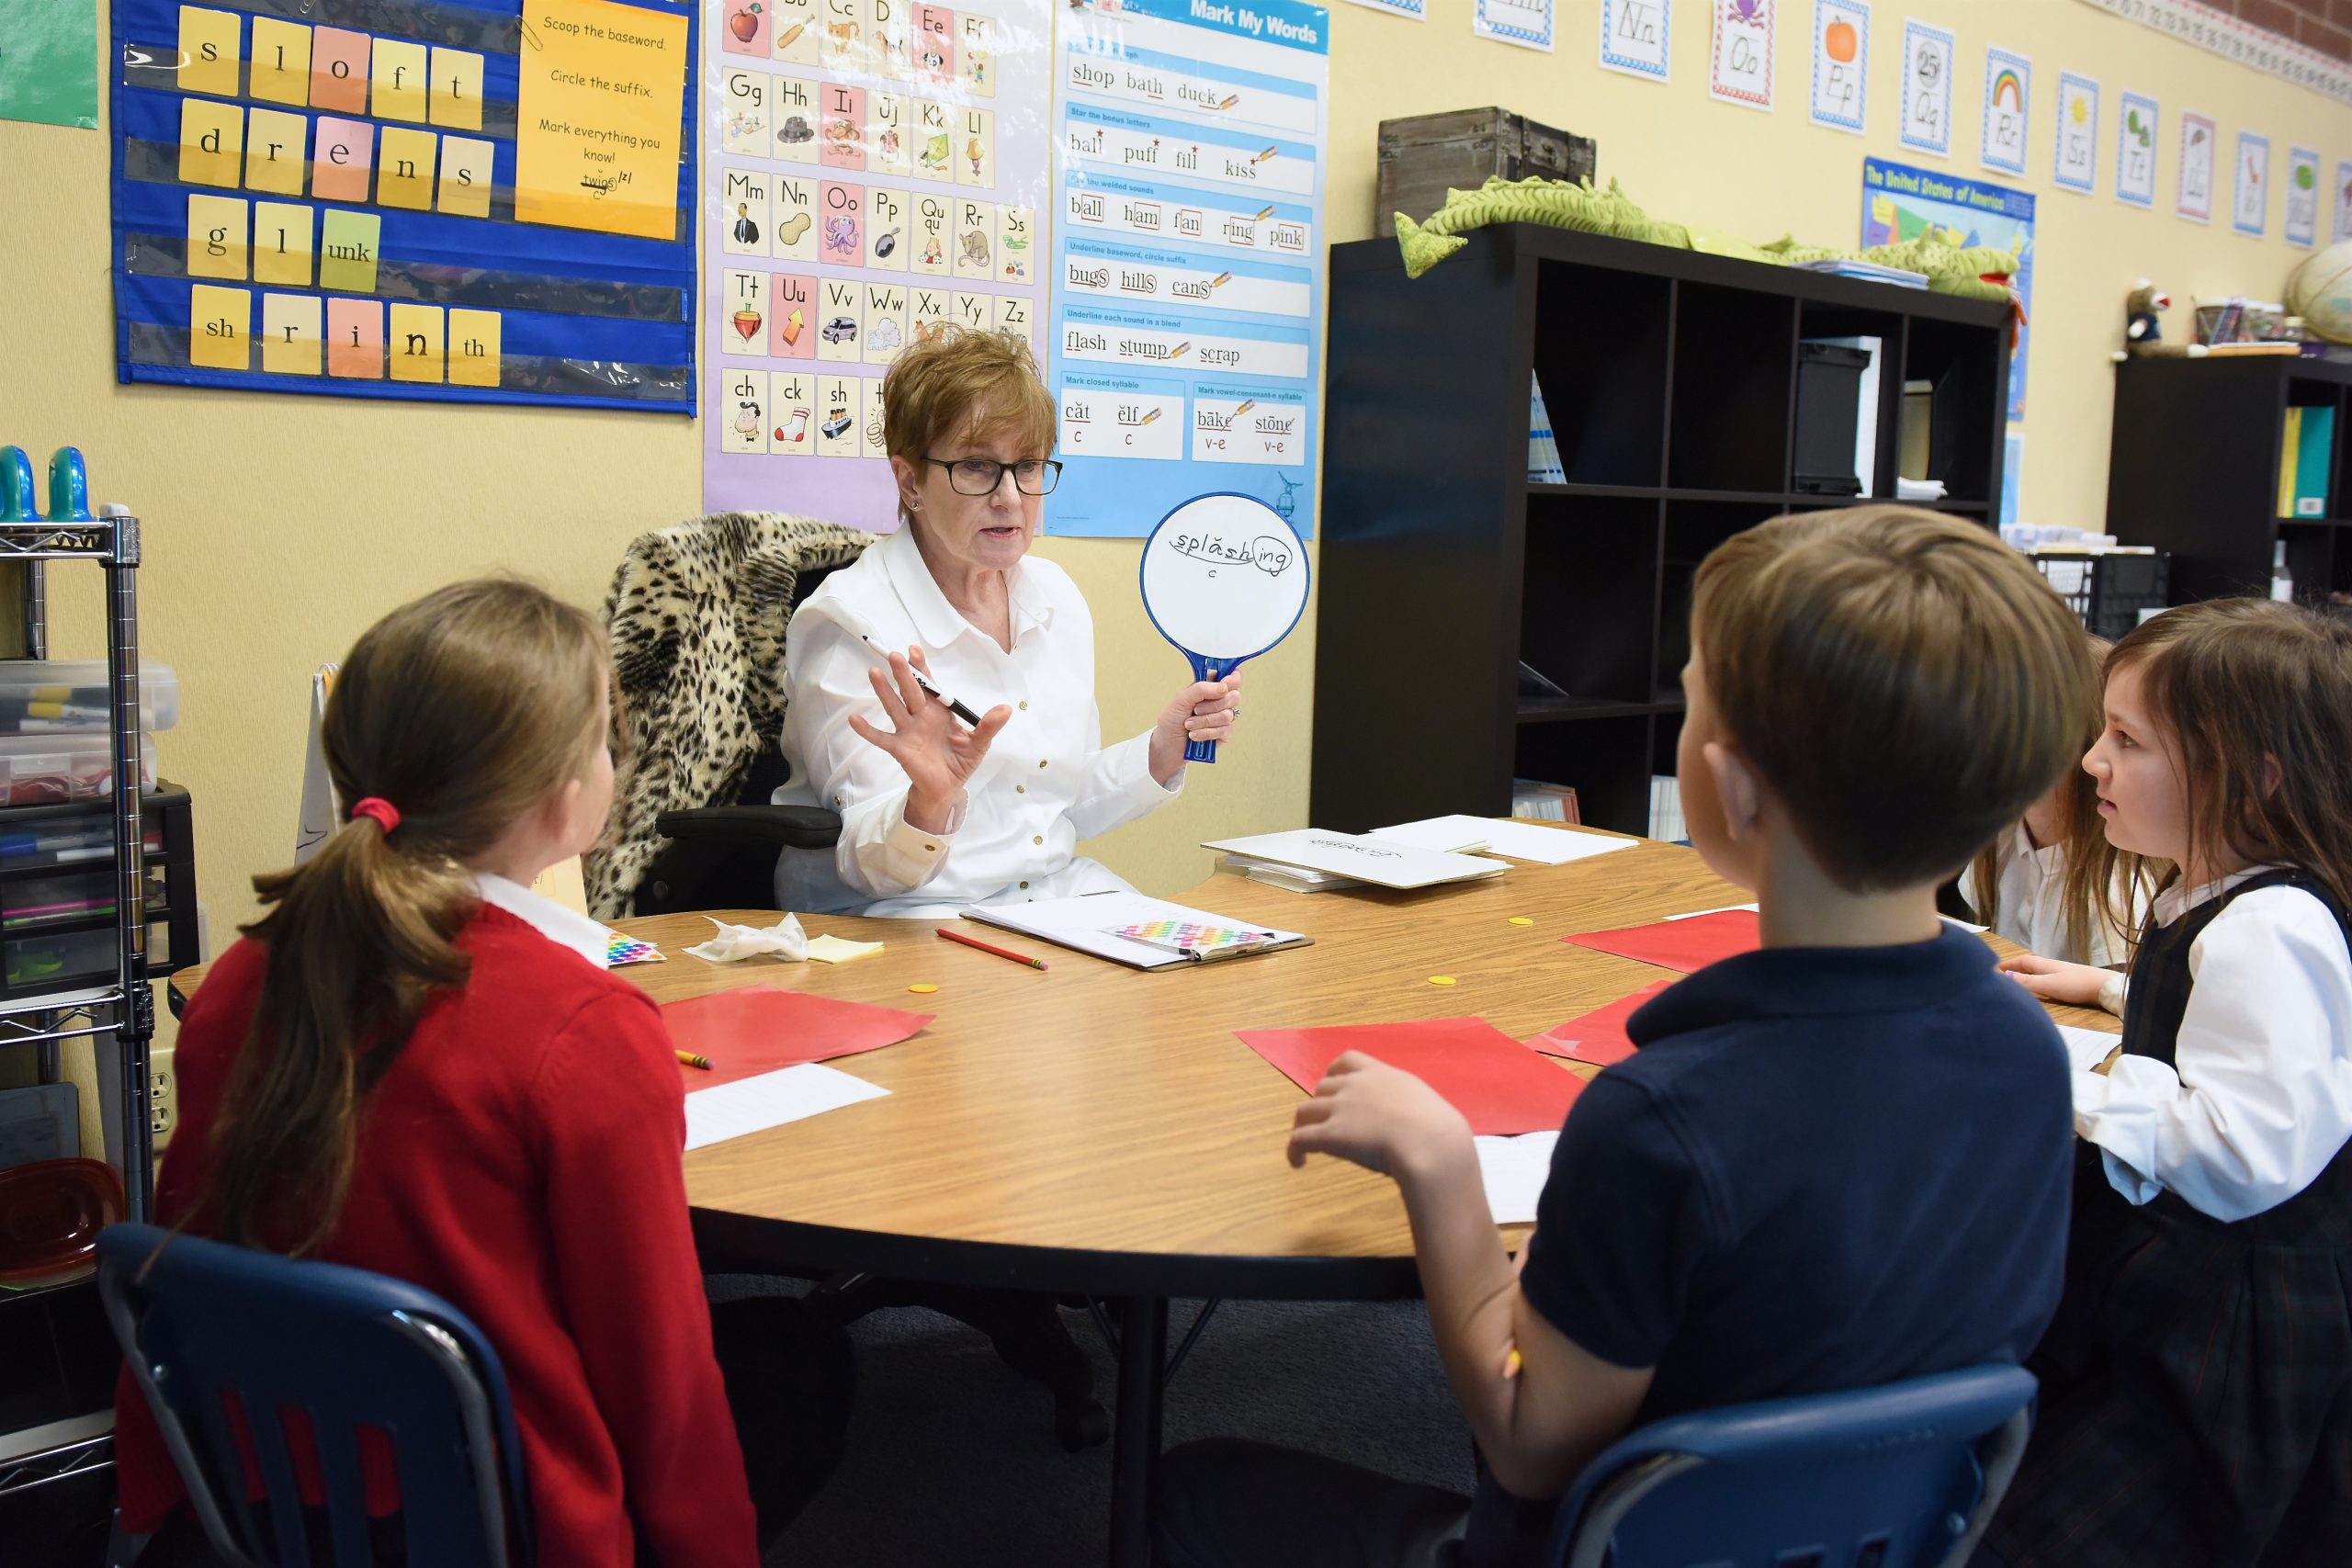 Melinda Zabriskie, Reading Assistant and Retired Waterford Class I Teacher, working with students on a Fundations unit.